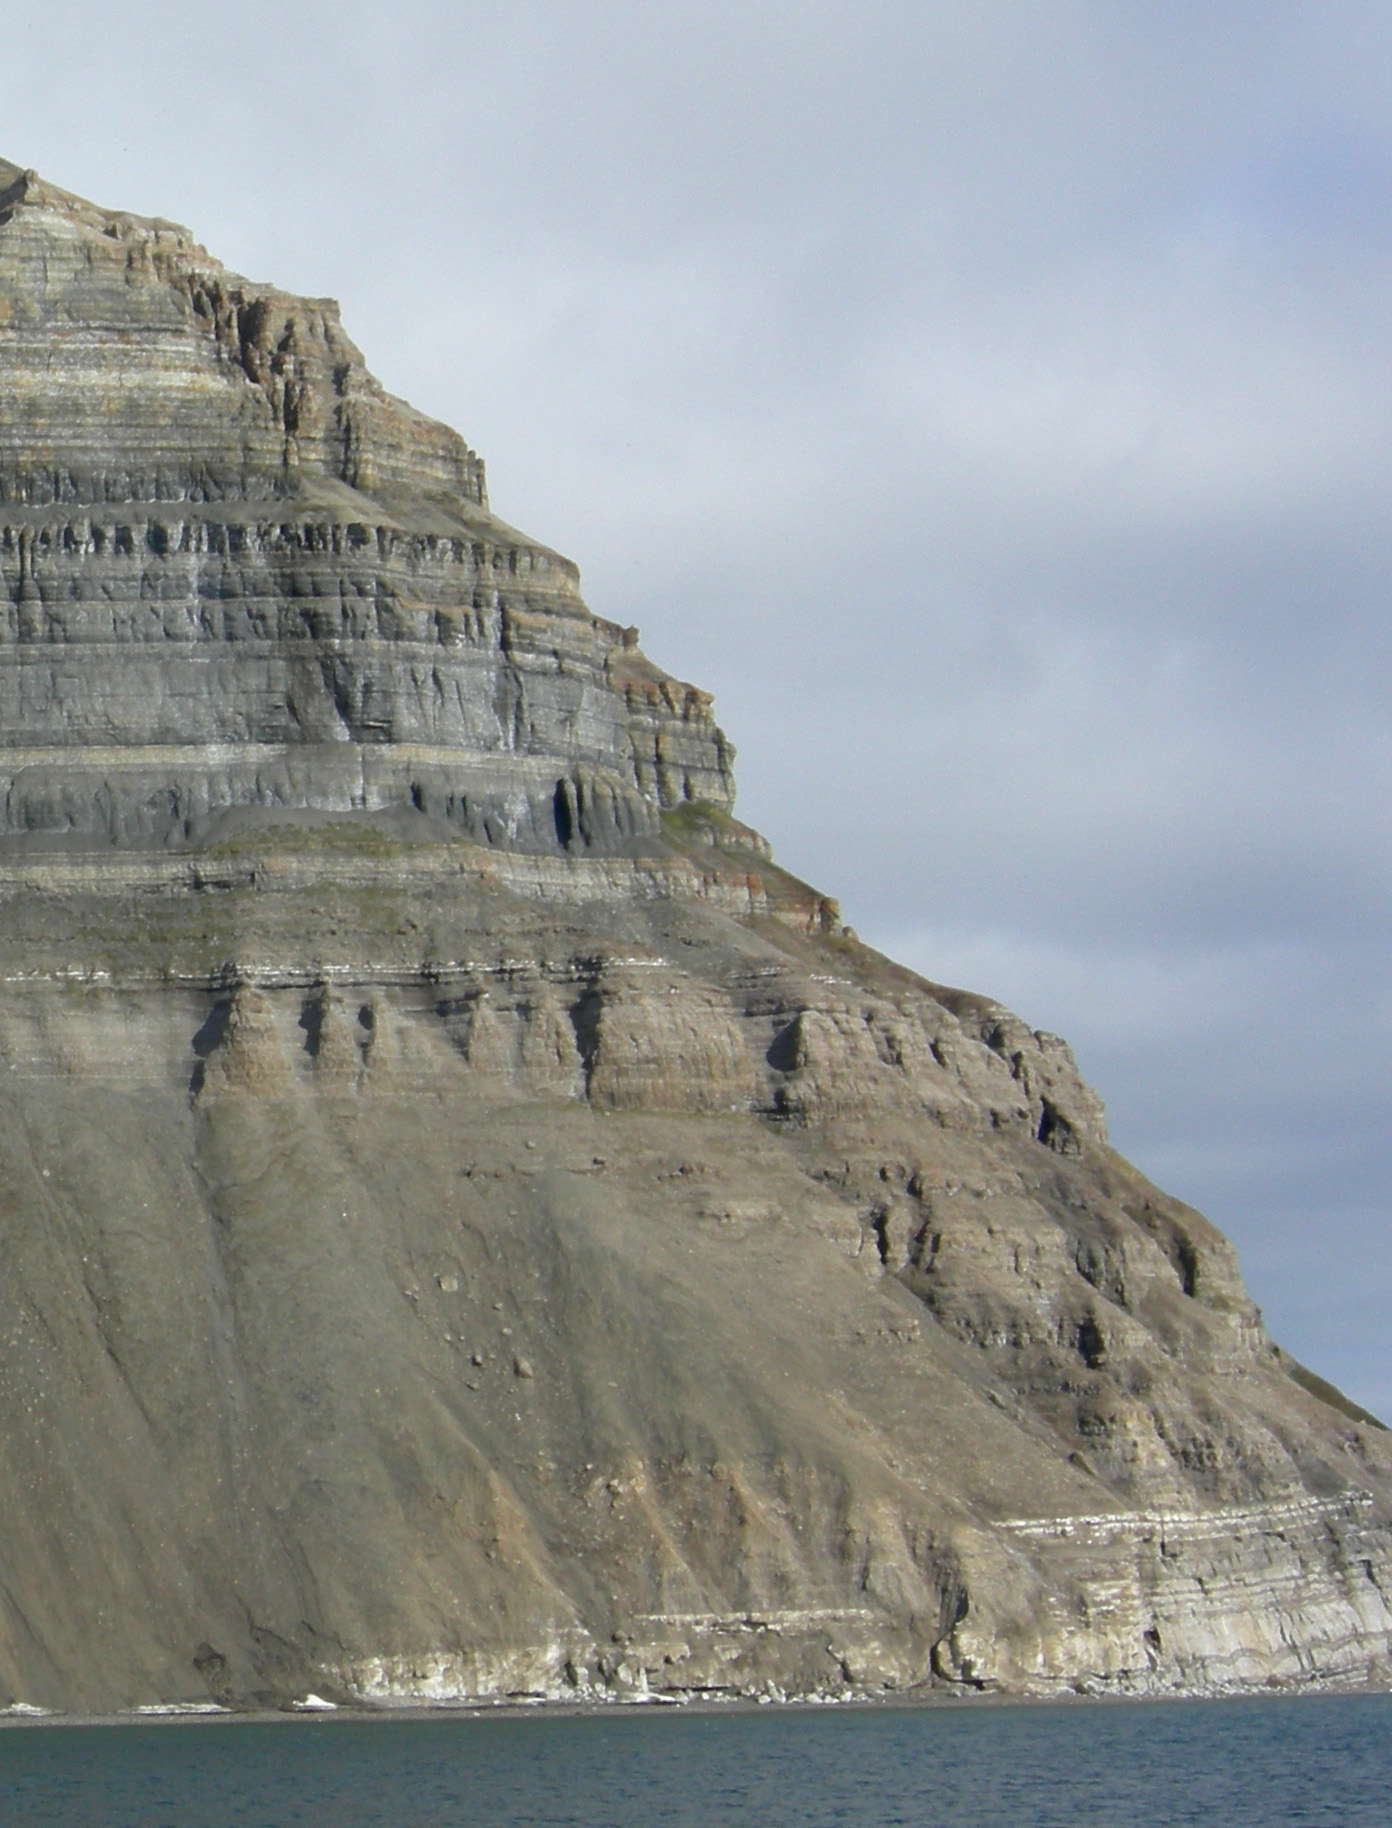 Sloping cliffside with flat-lying layers of tan and brown sedimentary rocks.